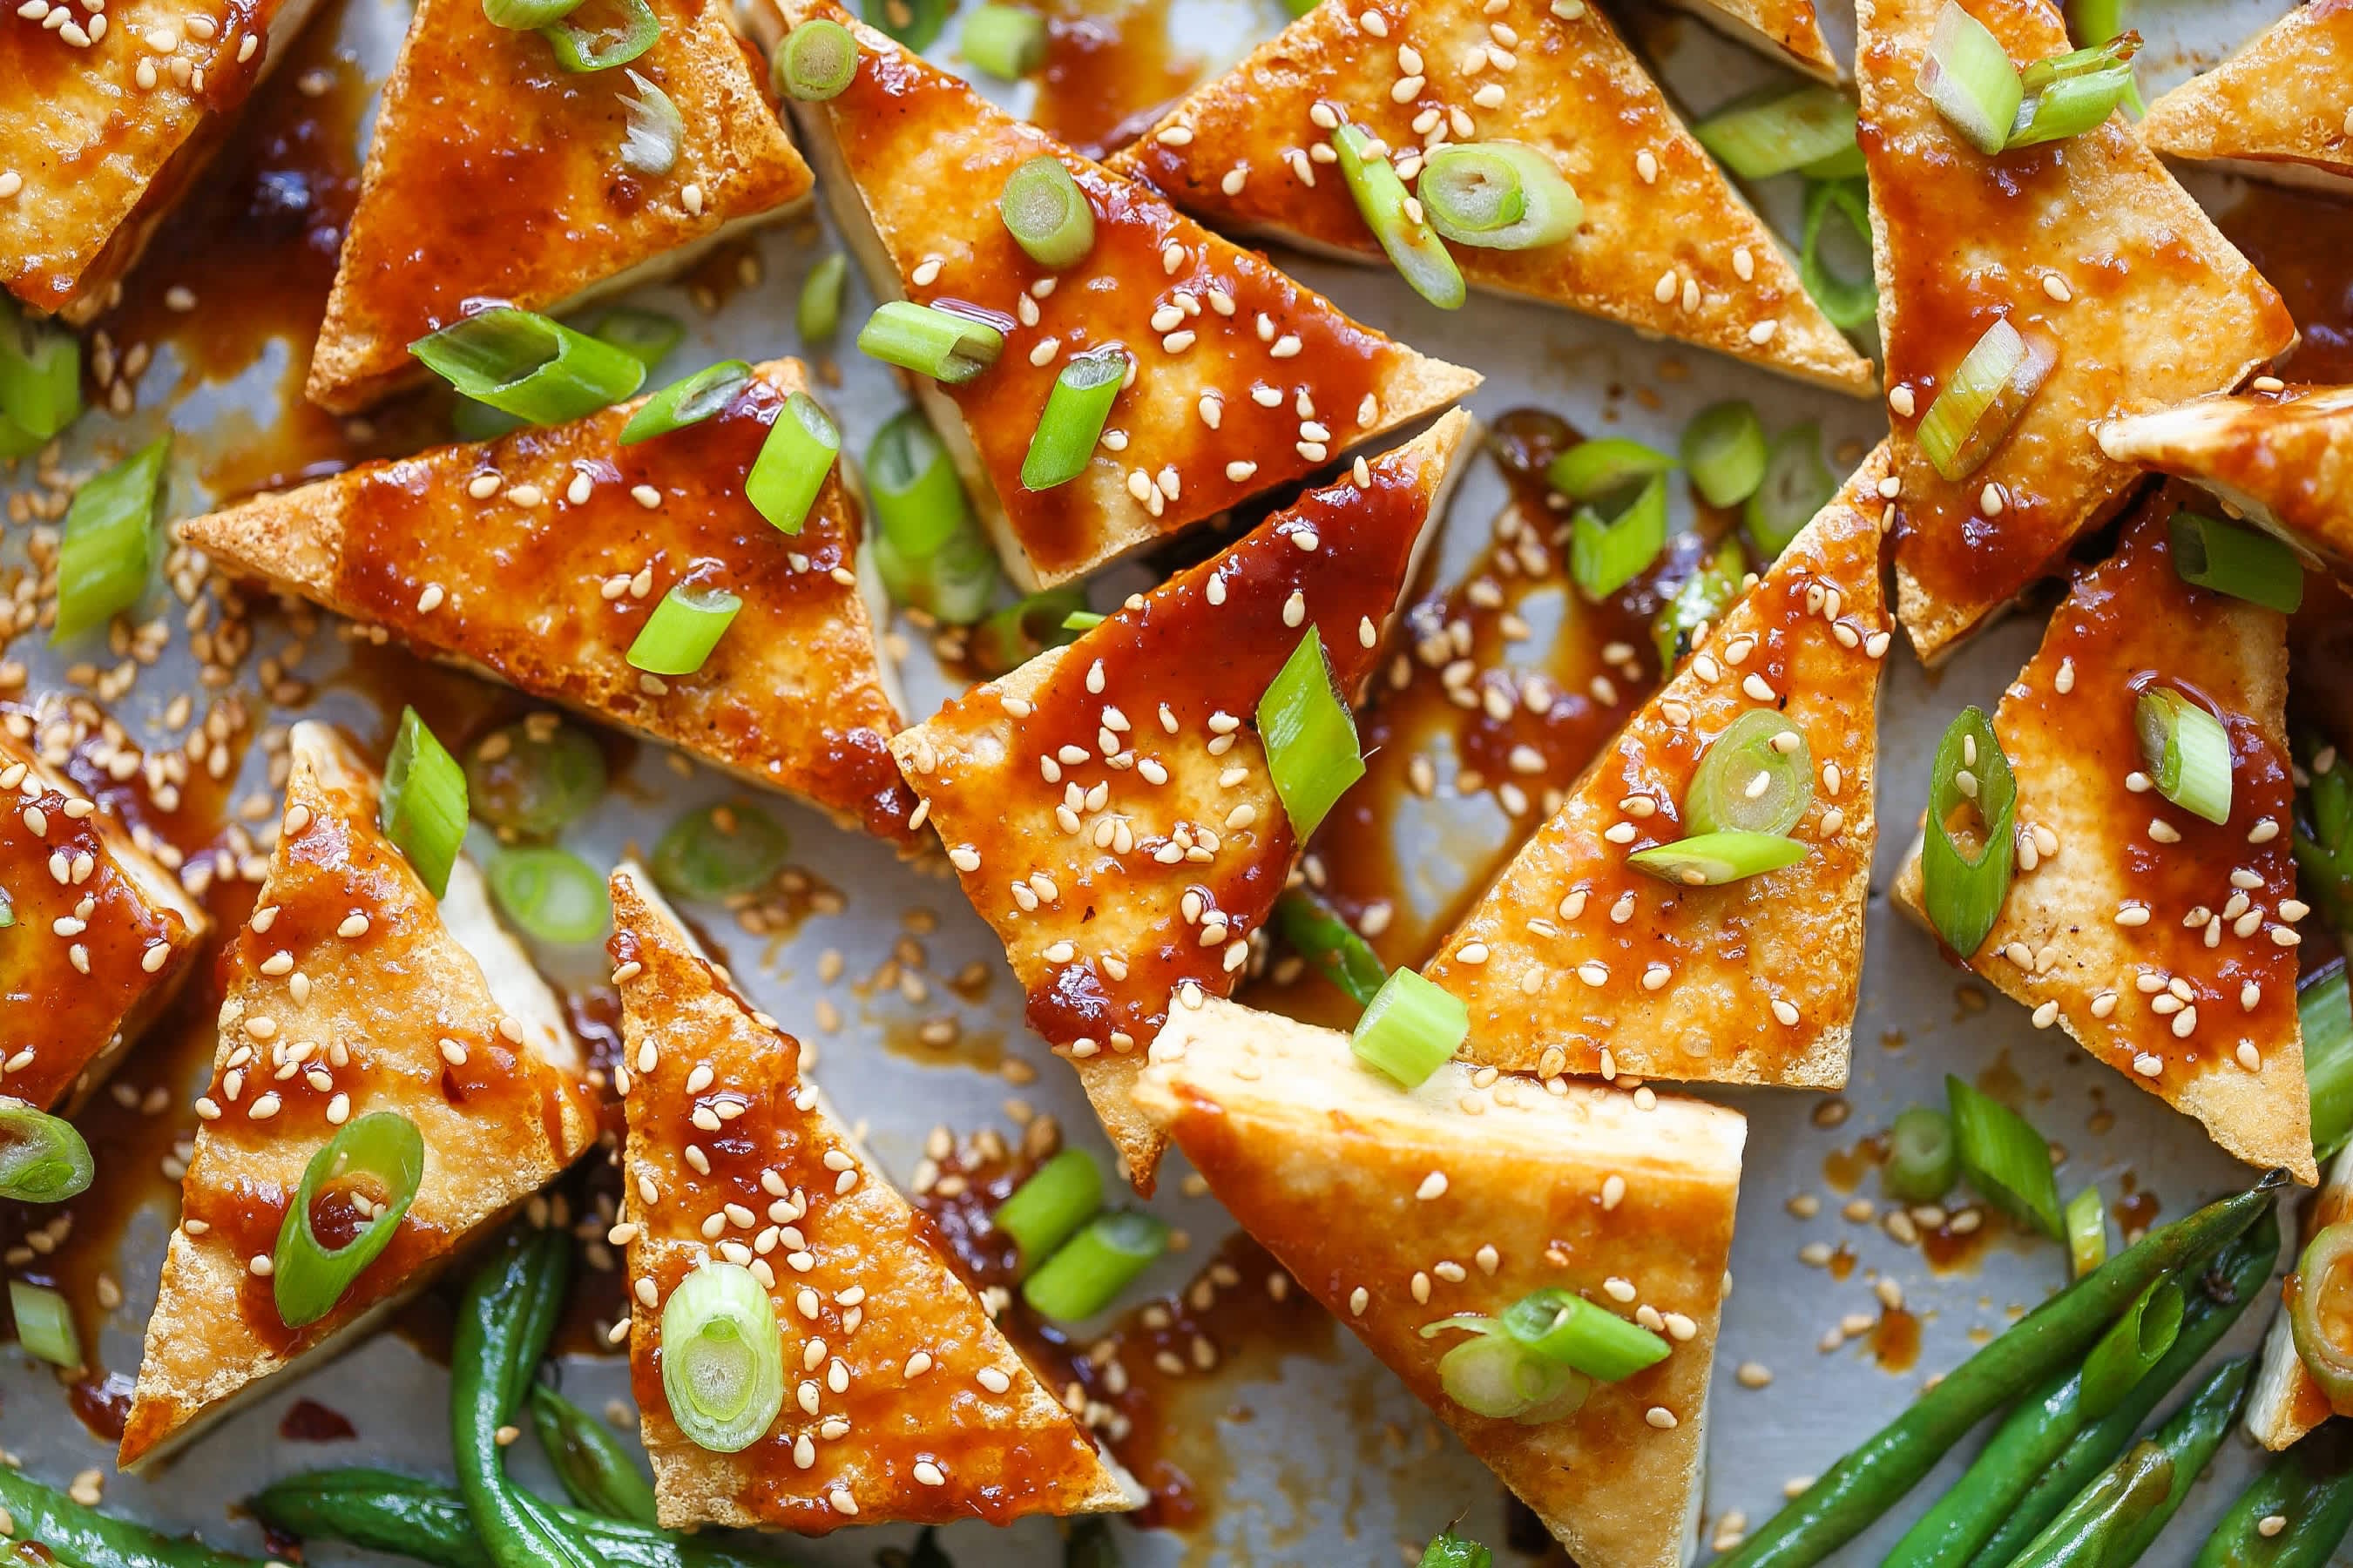 What's the Difference Between All the Types of Tofu?